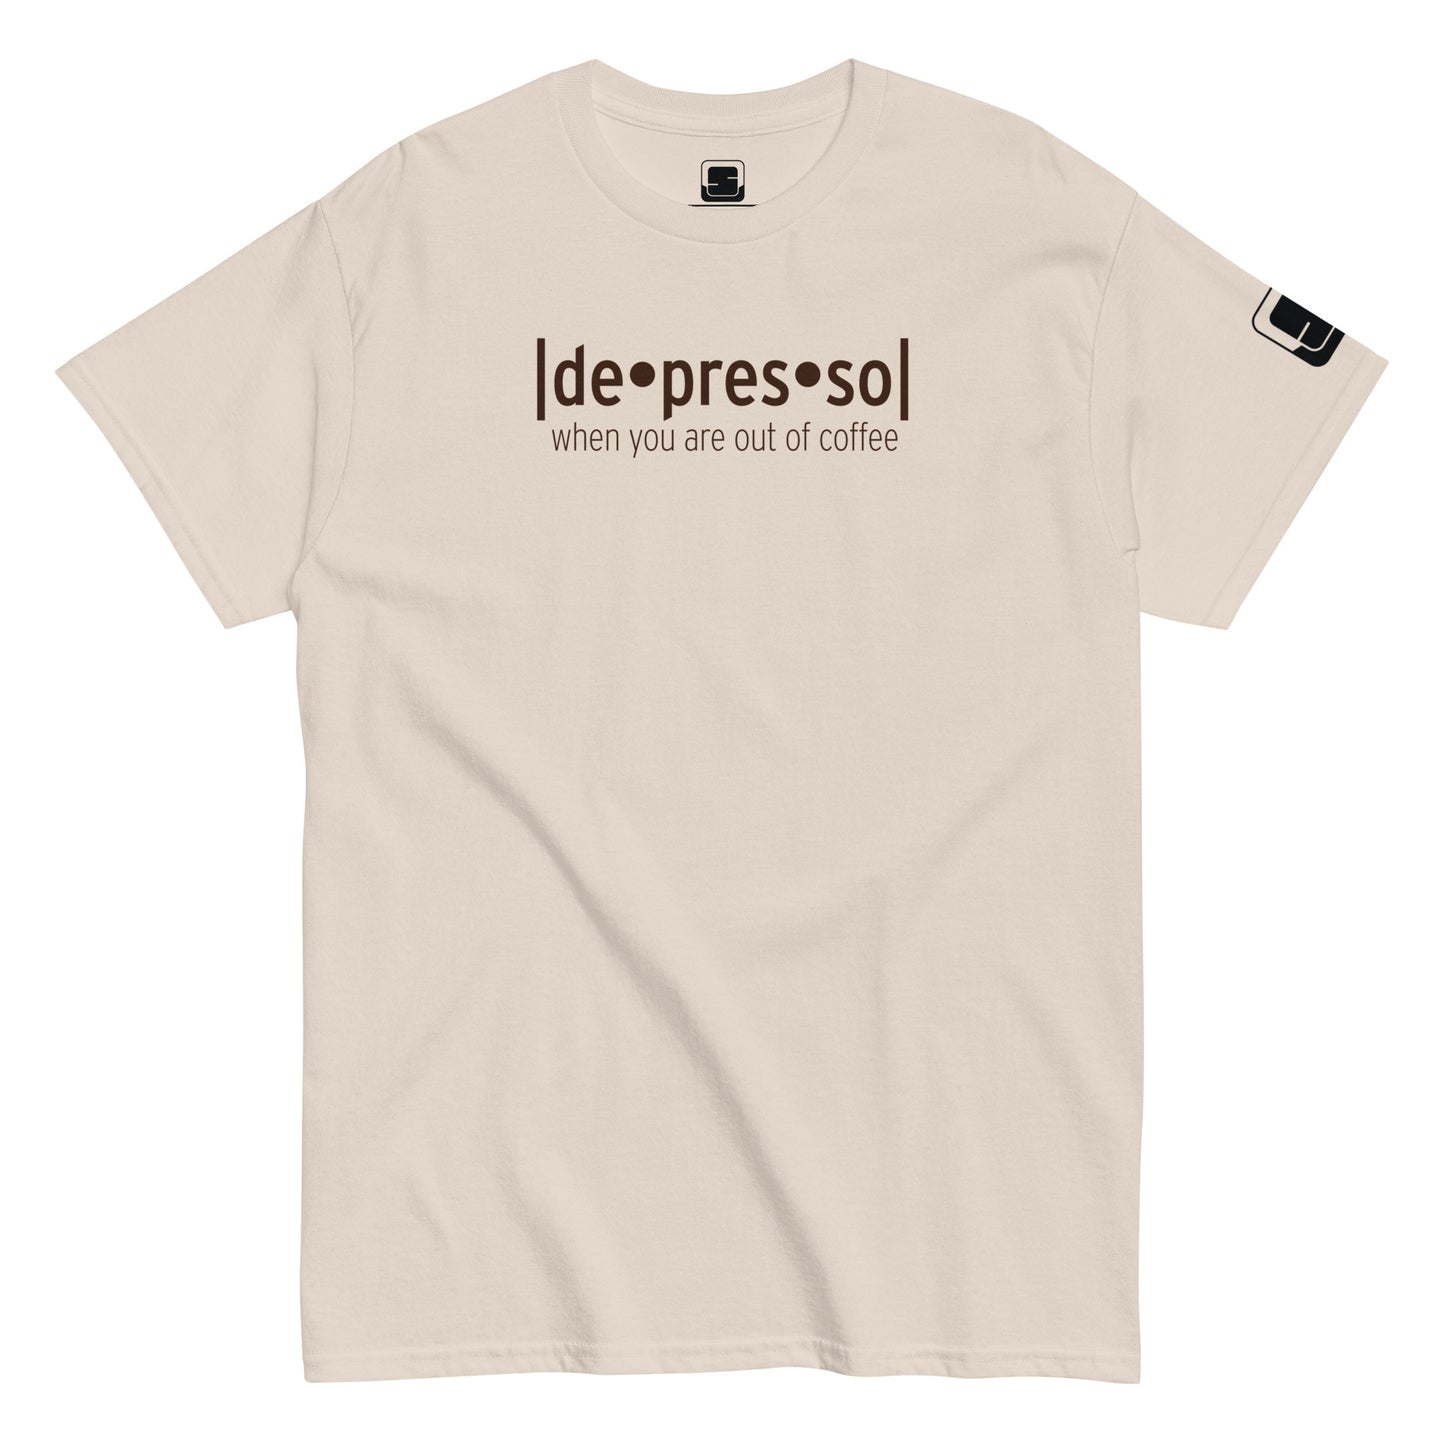 Natural sand colored t-shirt with the humorous phrase '[de]presso' followed by 'when you are out of coffee' in dark lettering, featuring a small black logo patch on the sleeve, displayed on a flat surface with a white background.